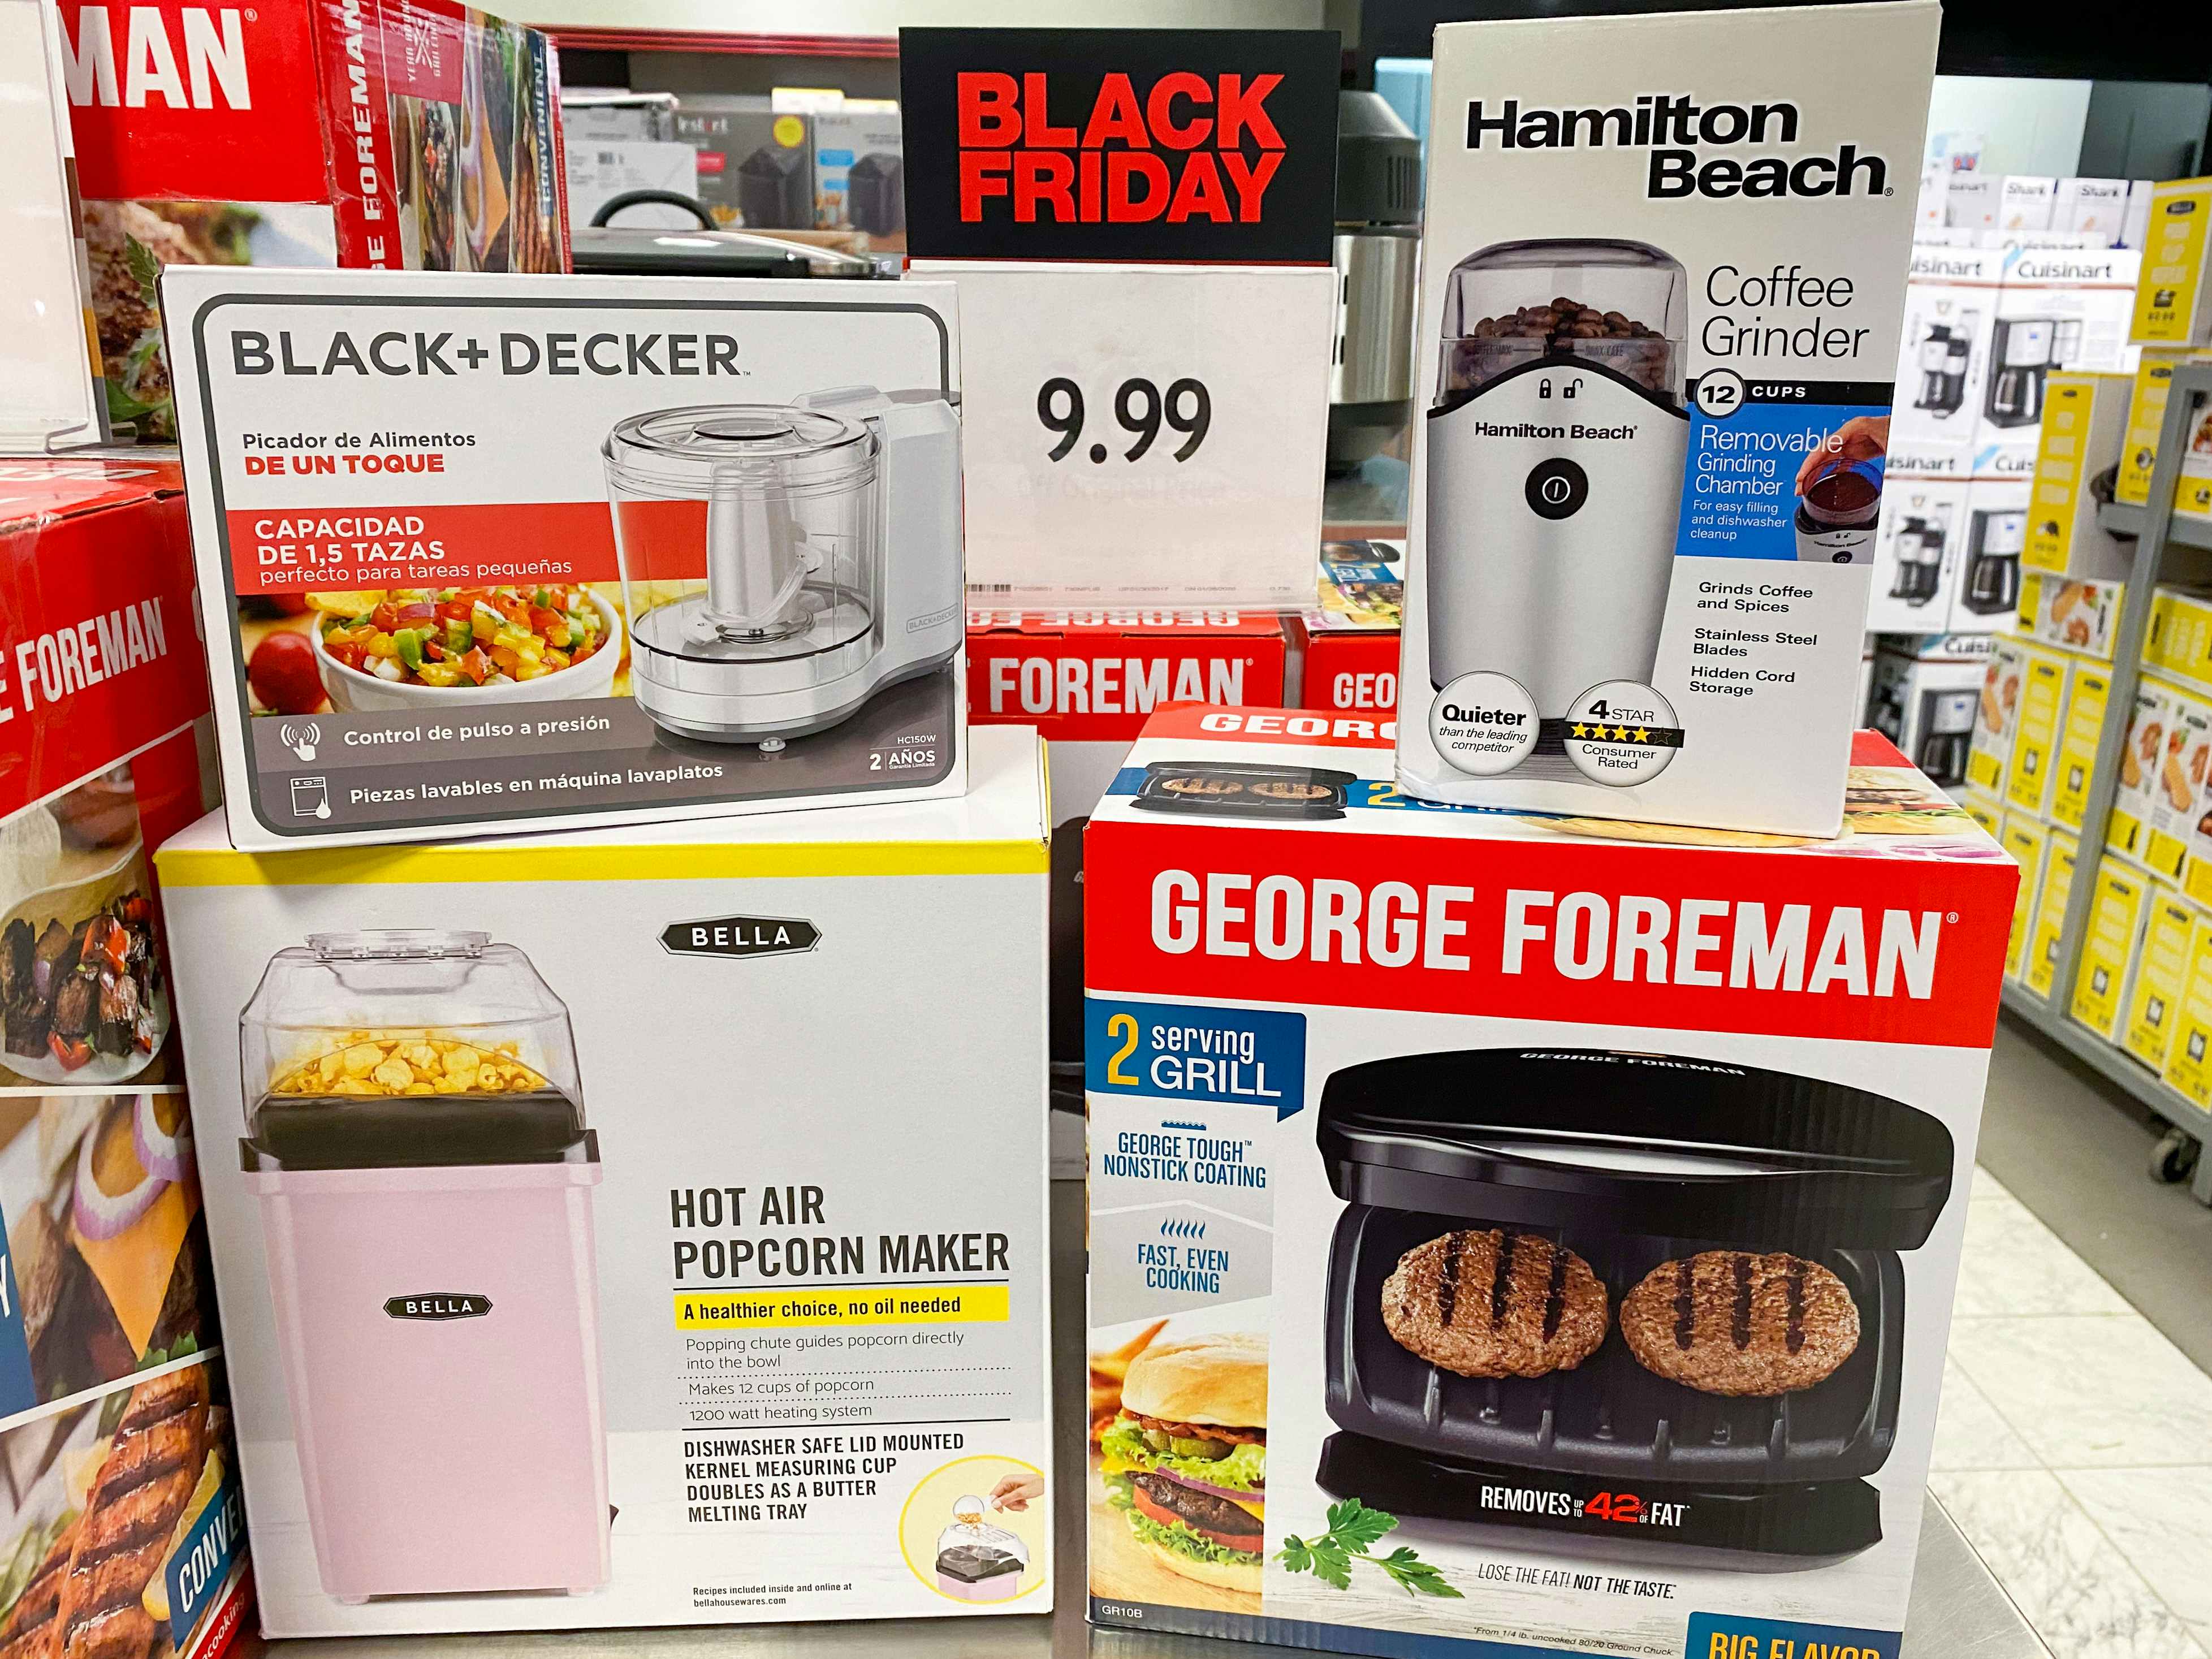 Small kitchen appliances on sale during Black Friday